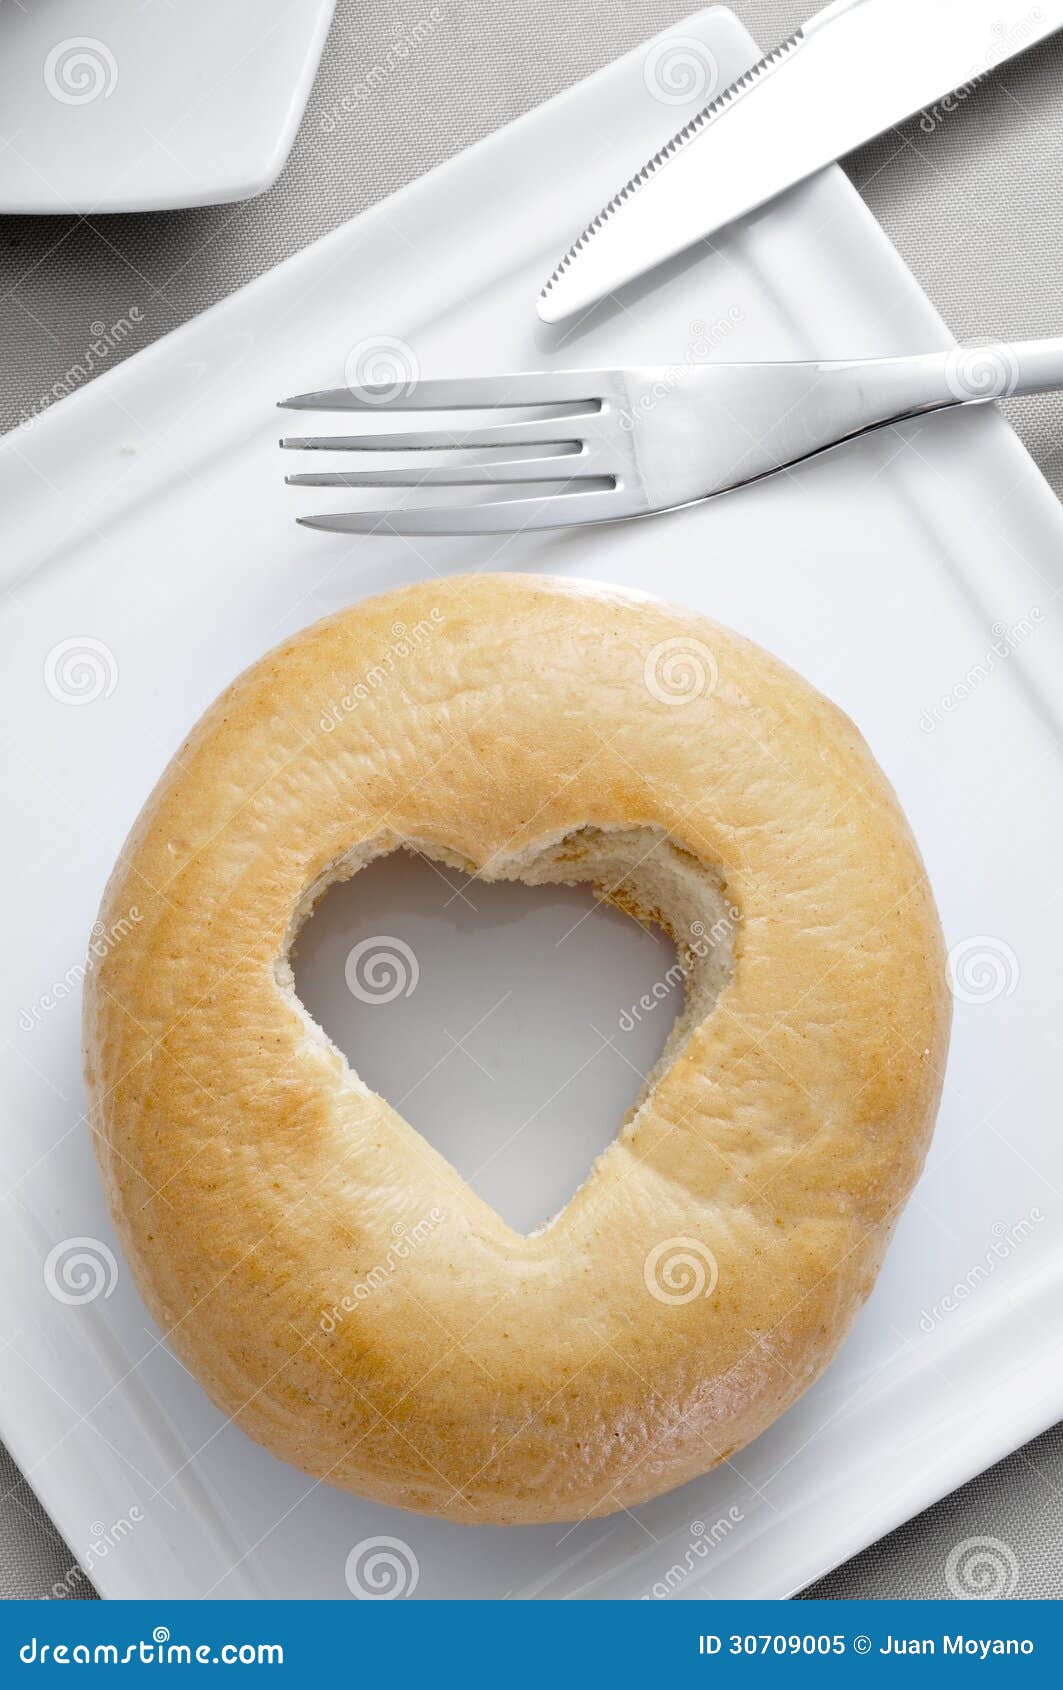 Bagel With A Heart-shaped Hole Royalty Free Stock Photo - Image: 30709005